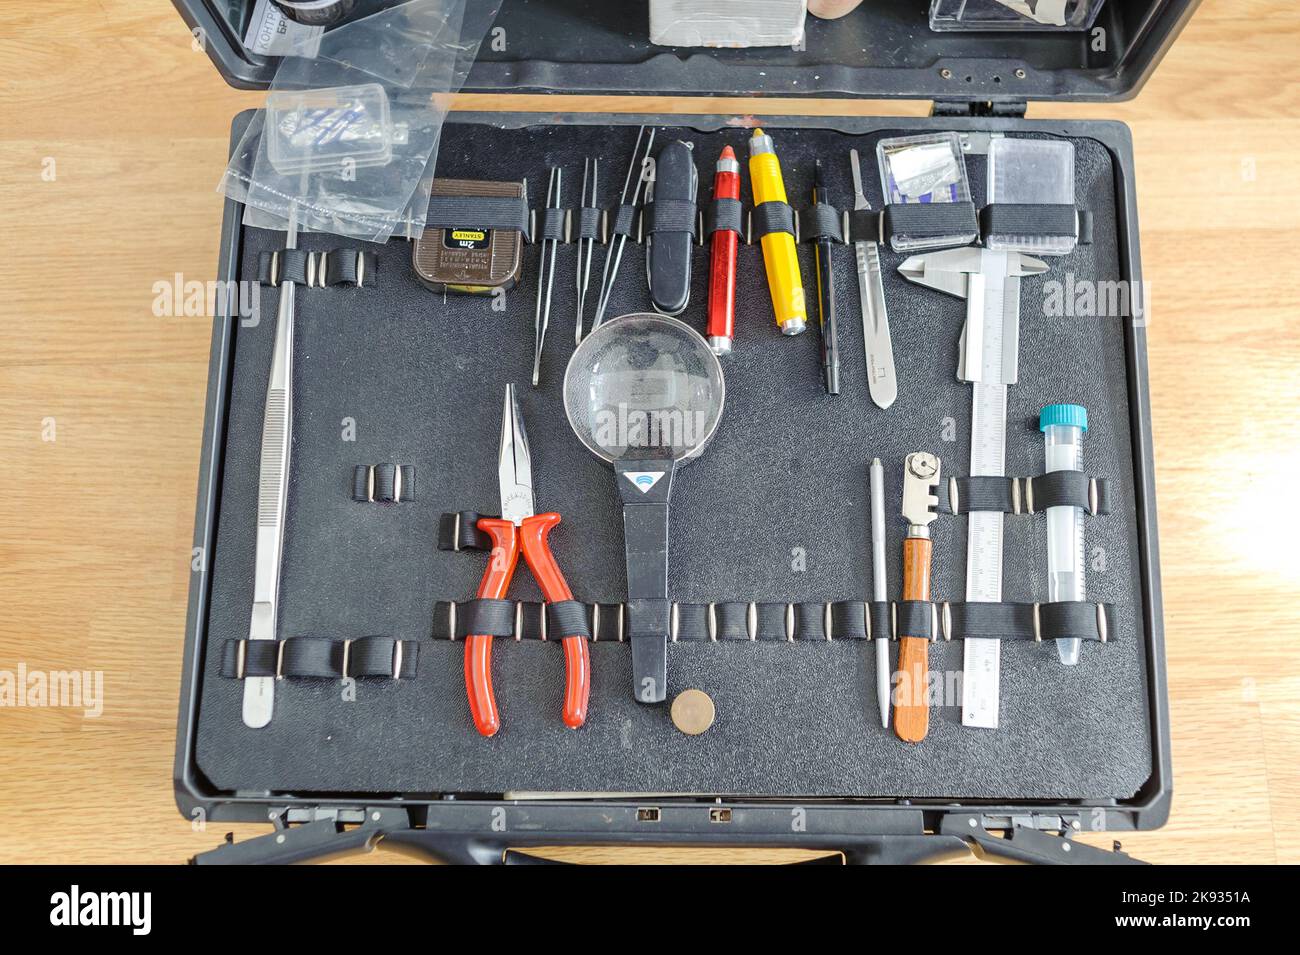 BVDA - BVDA: Materials and equipment for crime scene officers and forensic  laboratories